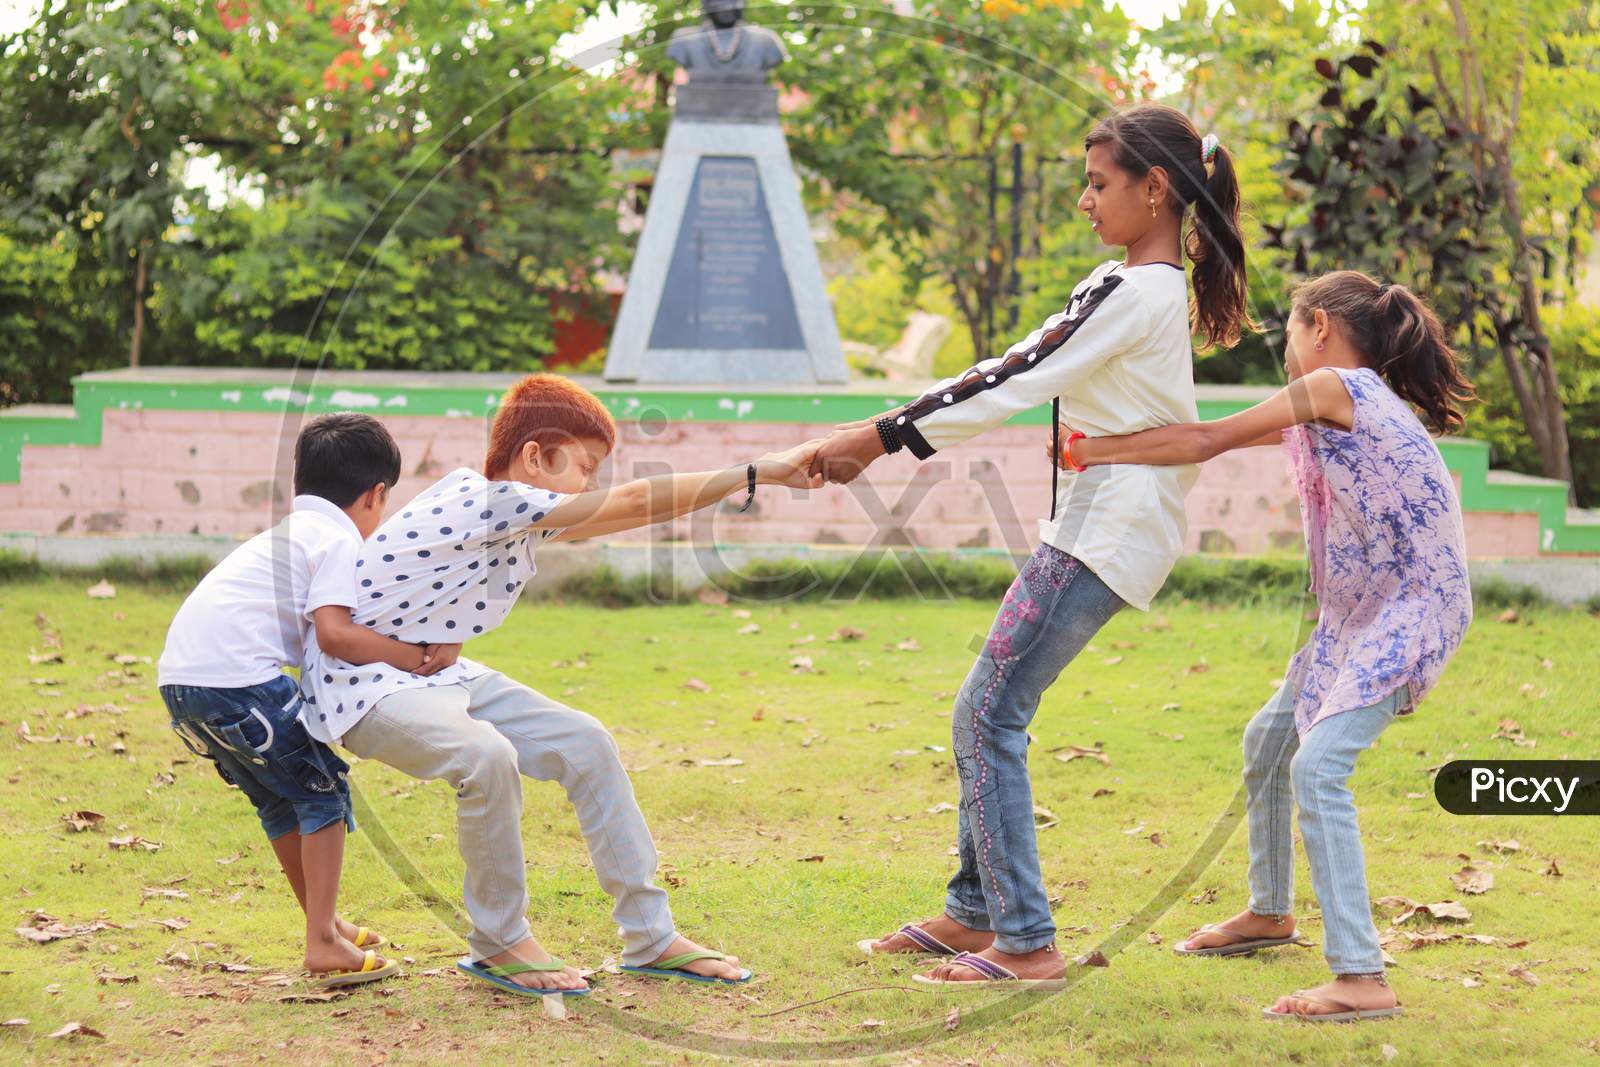 Children Playing Outdoor Games - Concept Of Kids Enjoying Outdoor Games In Technology-Driven World.